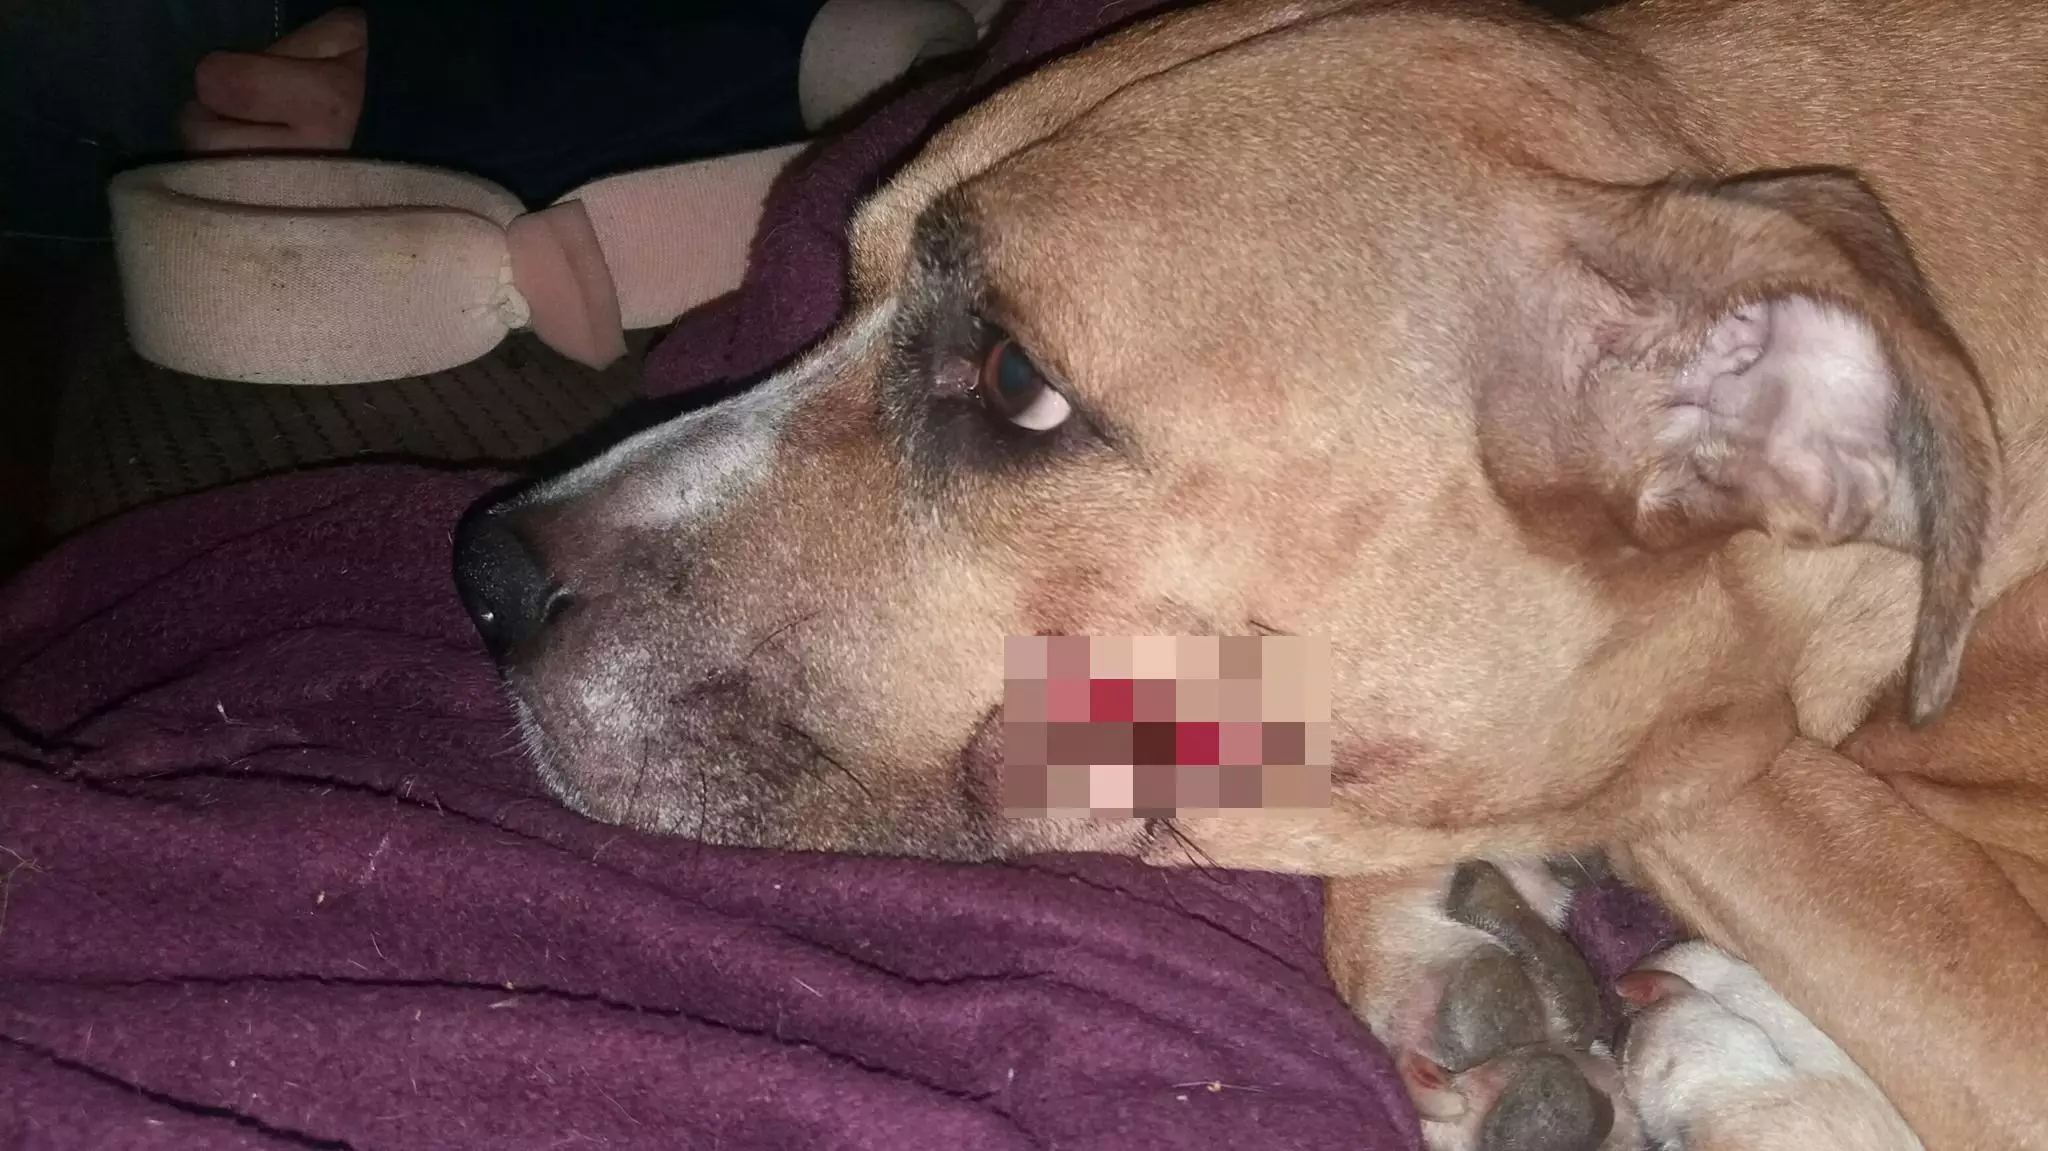 Zena was struck with a machete trying to defend her puppies.